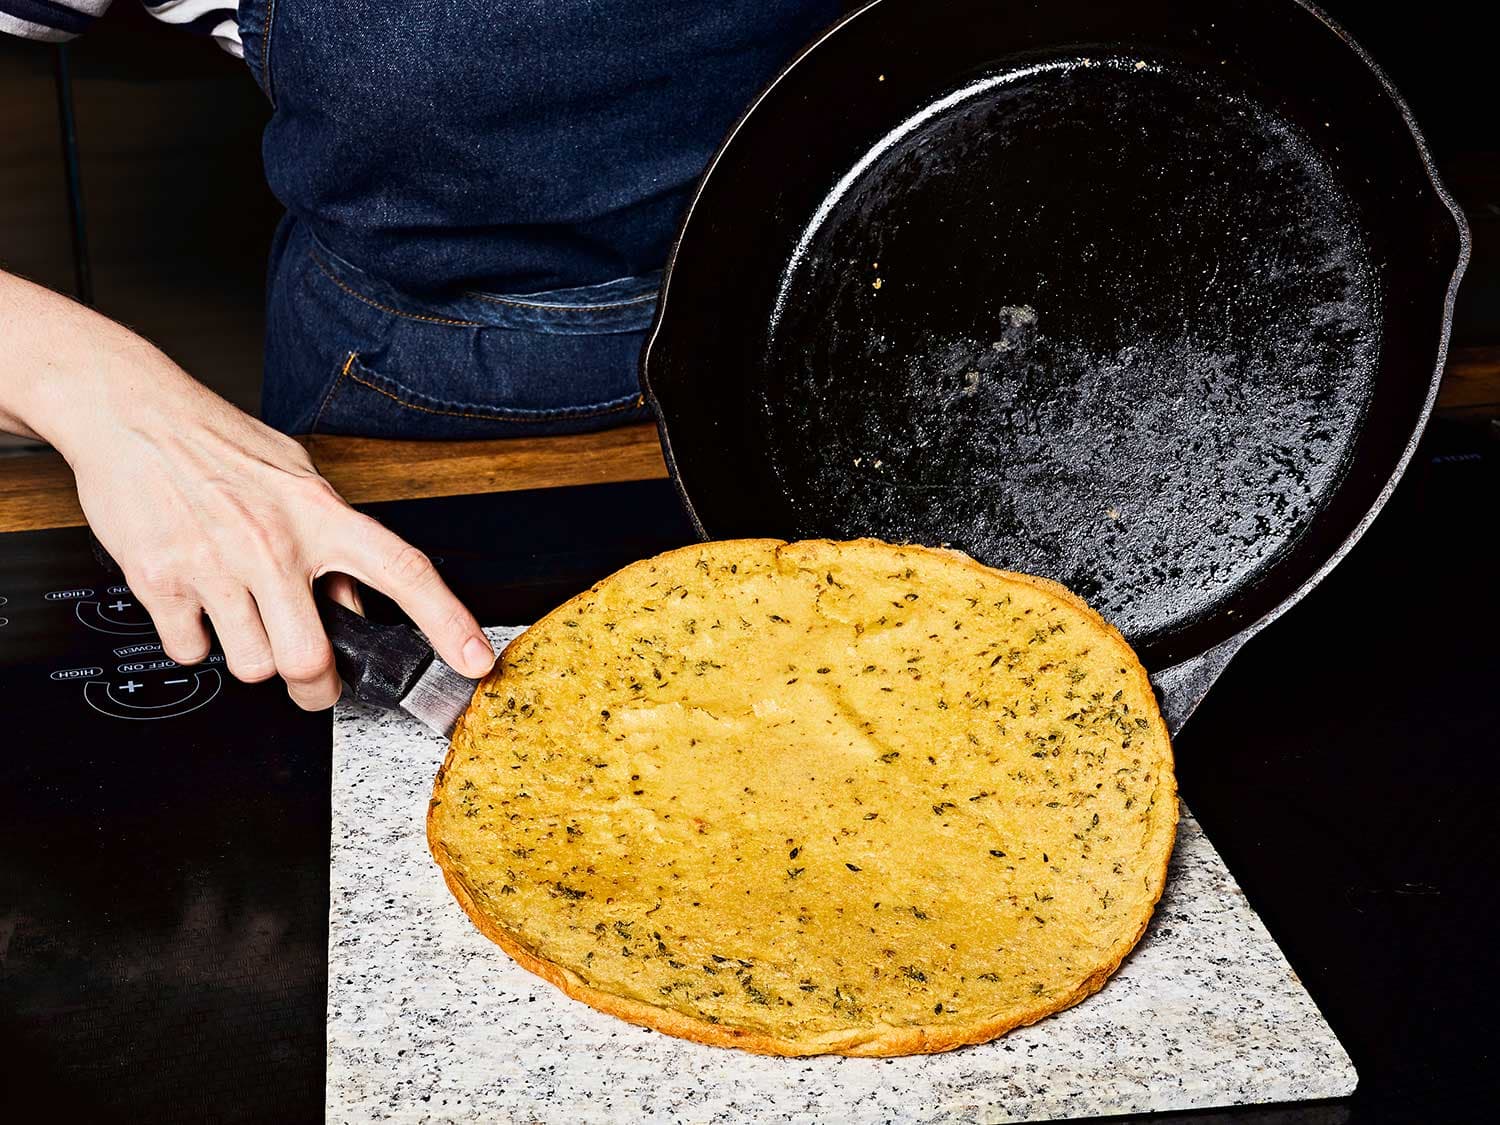 A thin offset spatula will help you remove the farinata from the skillet in one piece.